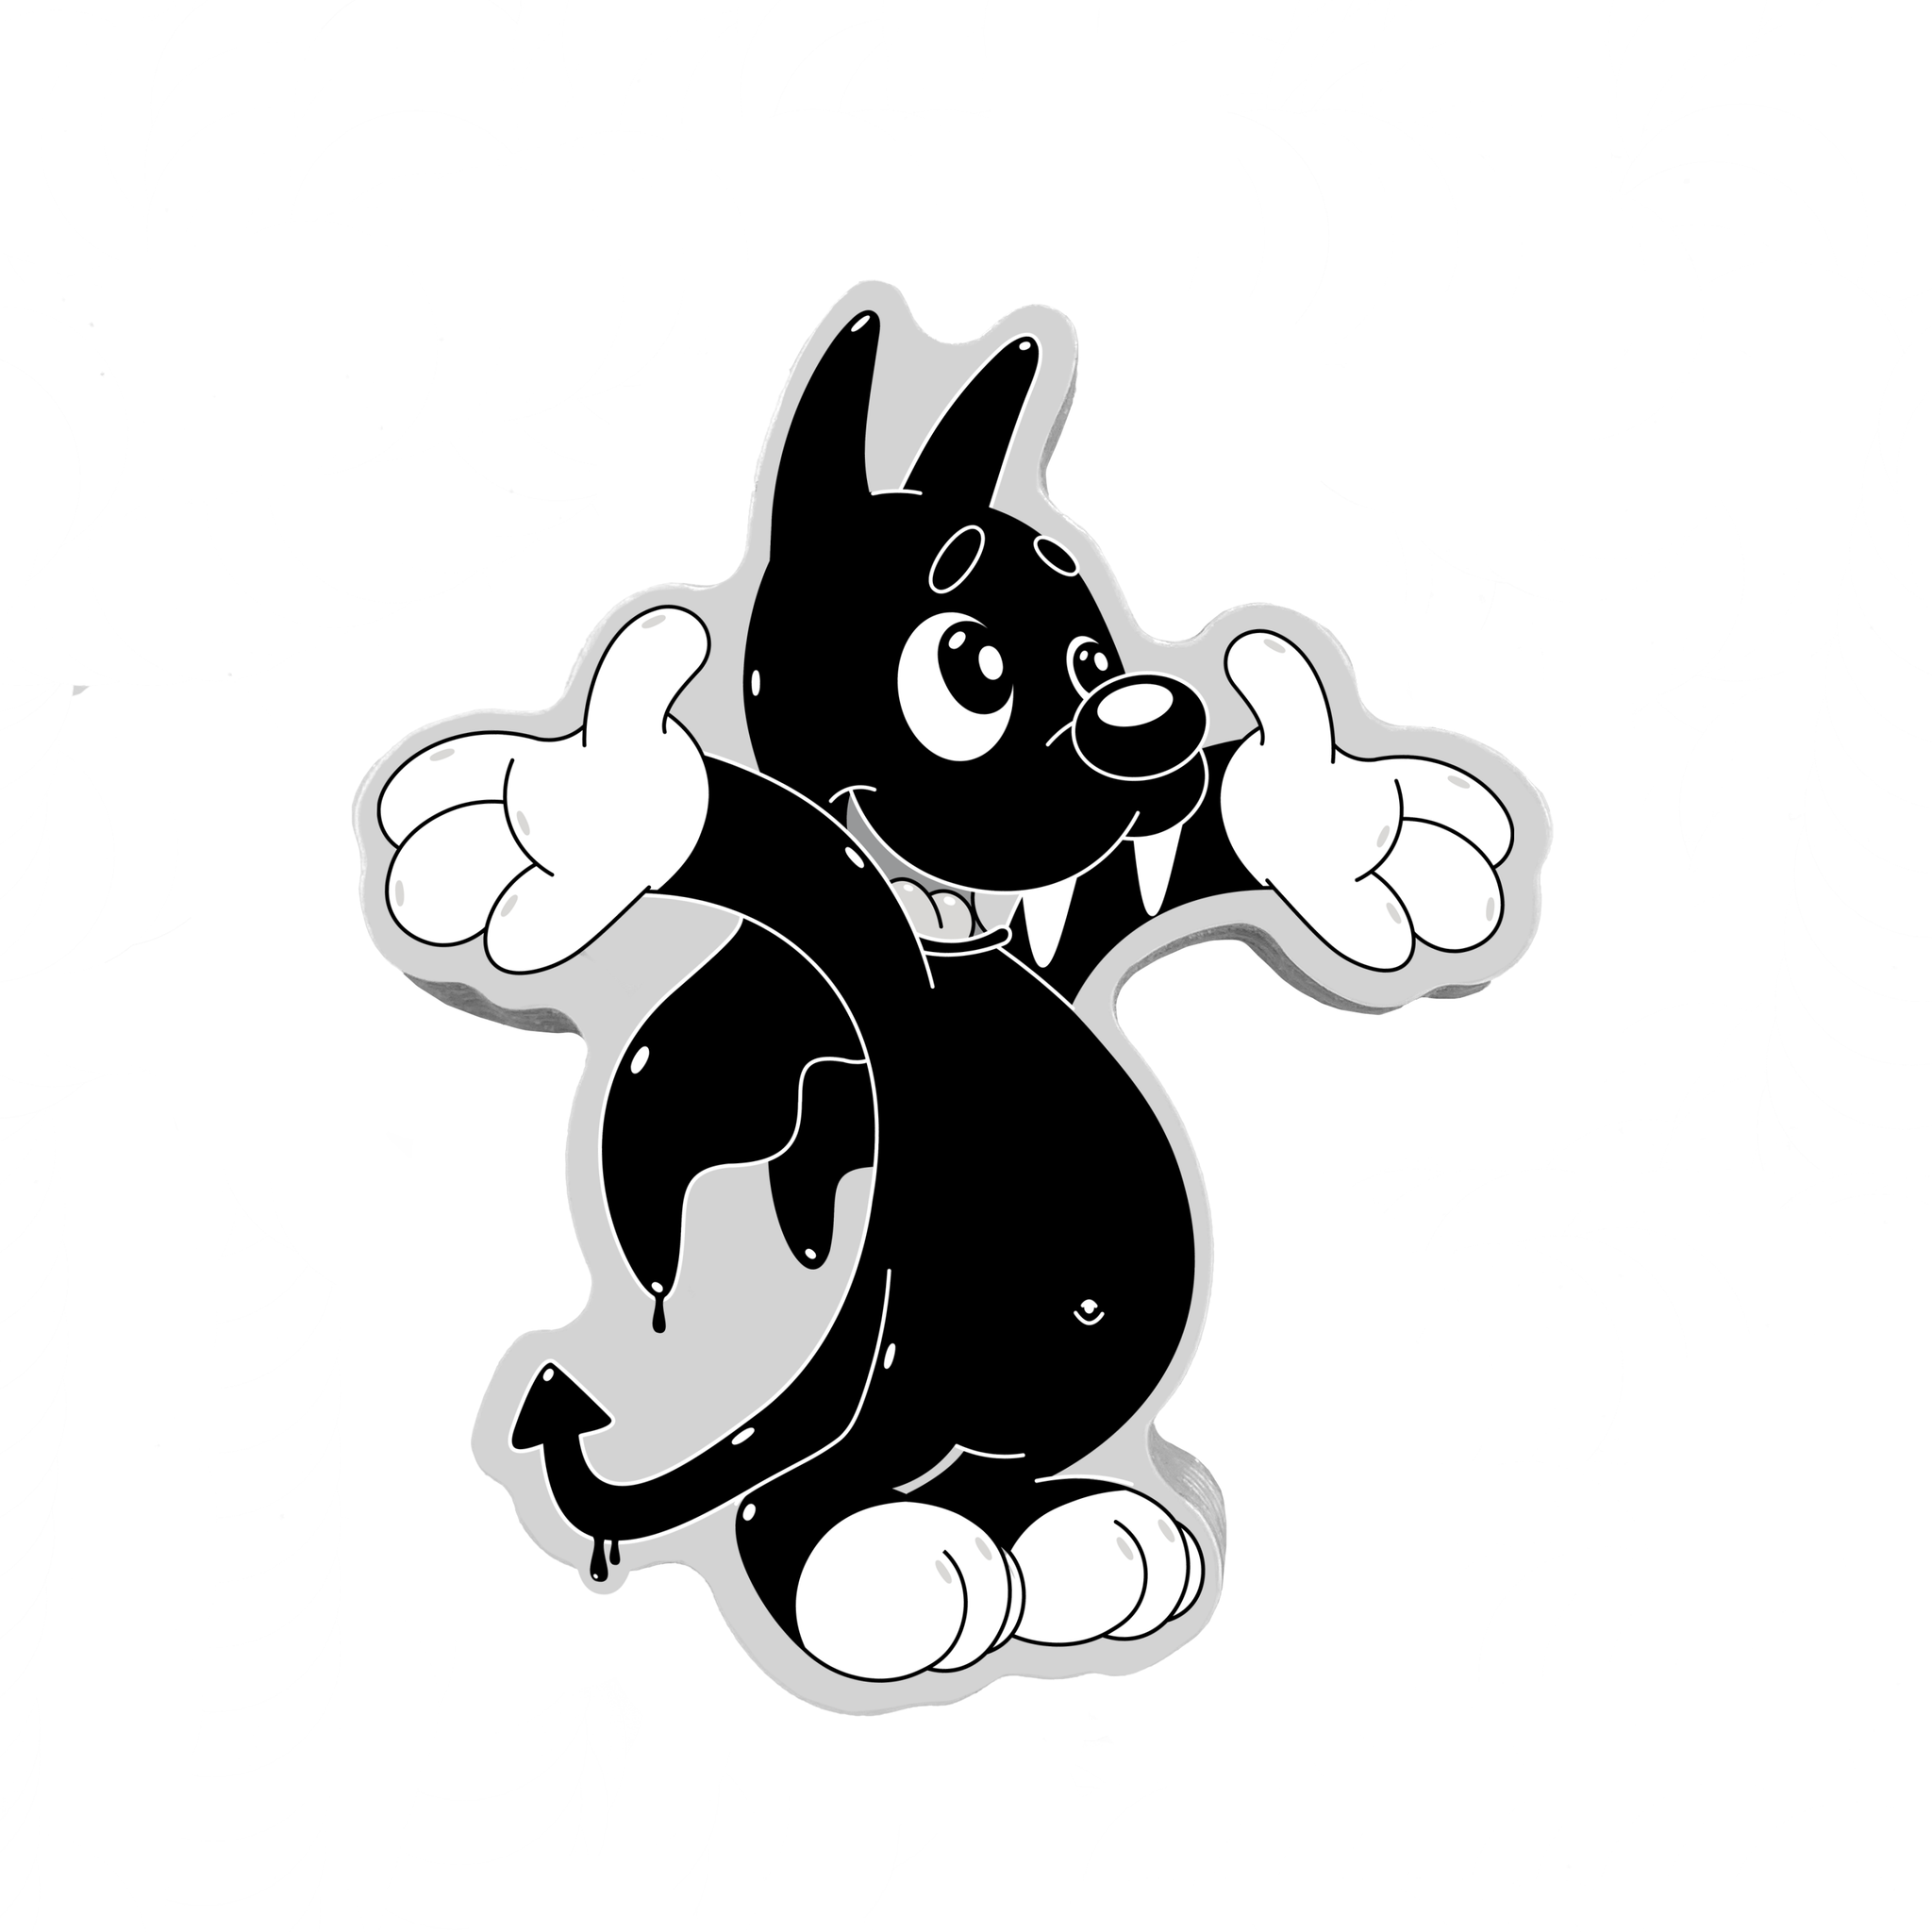 Vampy the Dog Imagination Sticker (Inked! Collection)